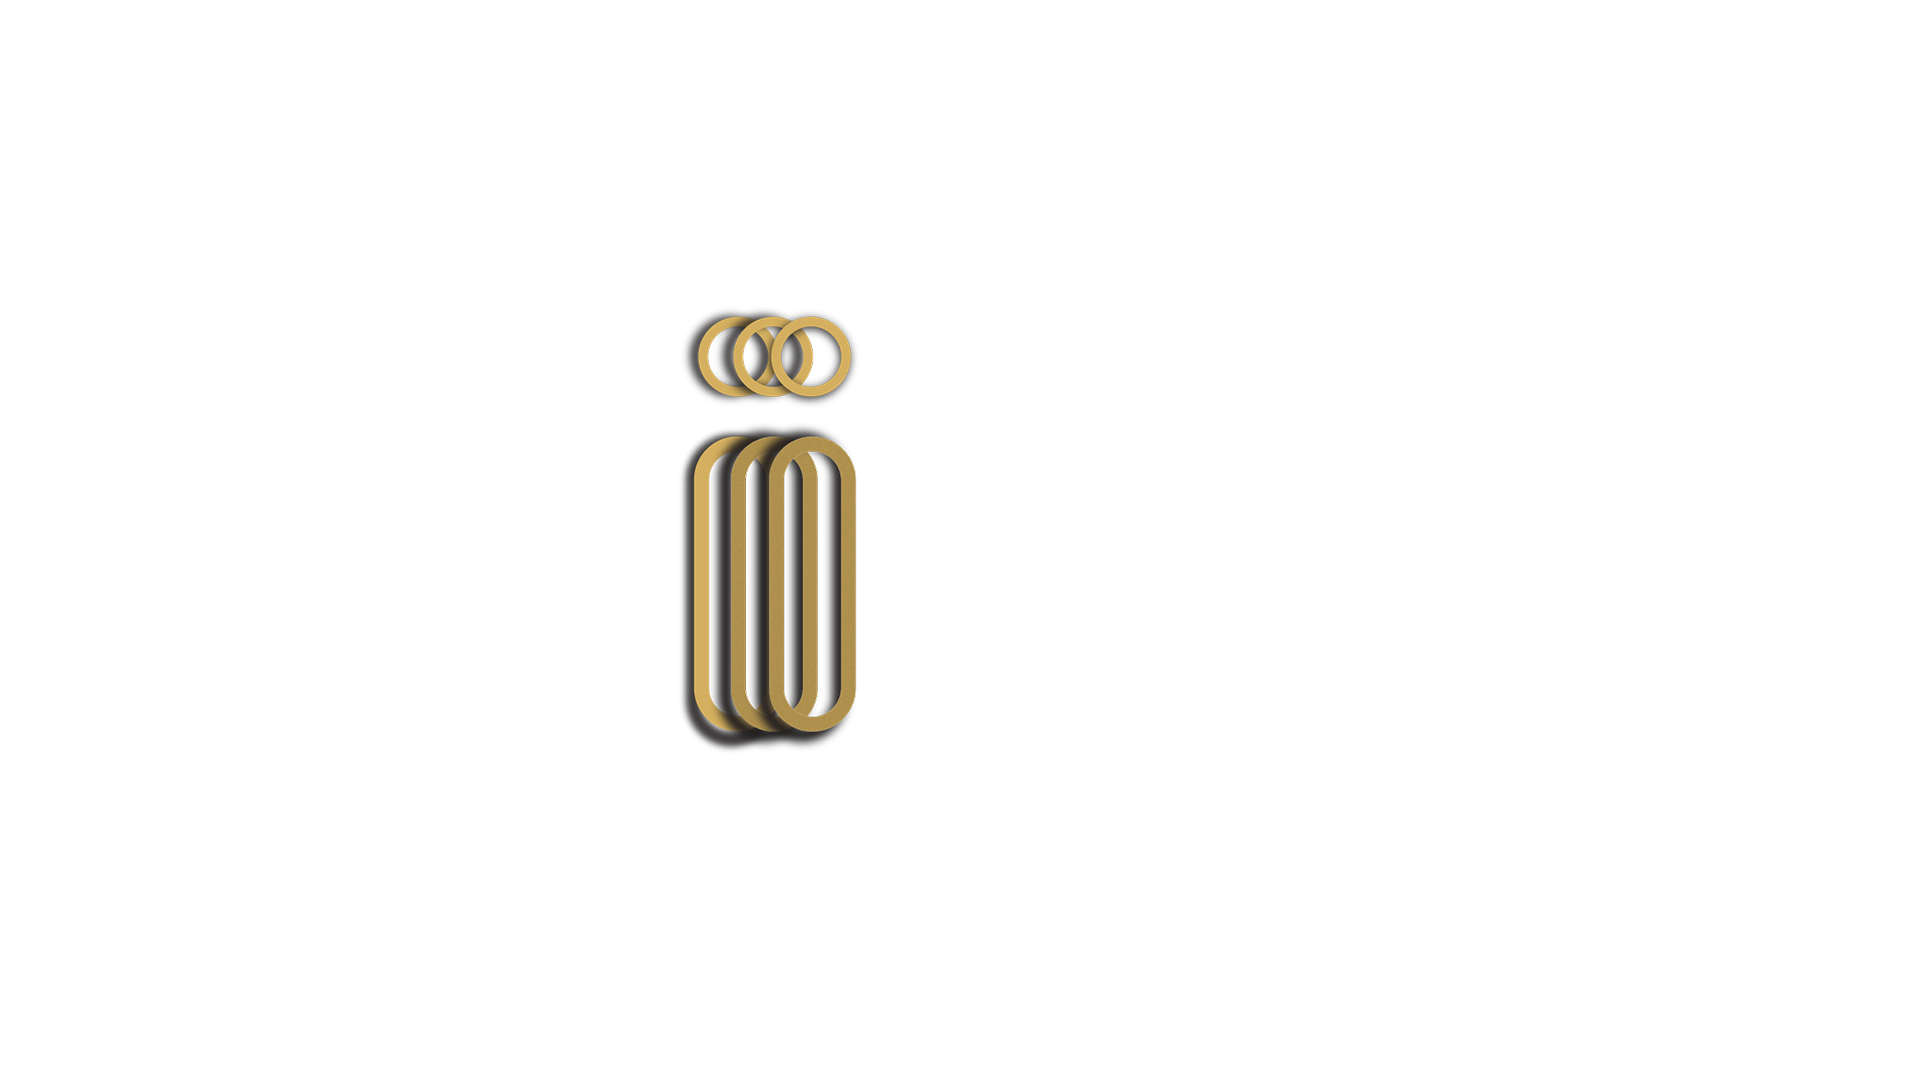 Third I Productions